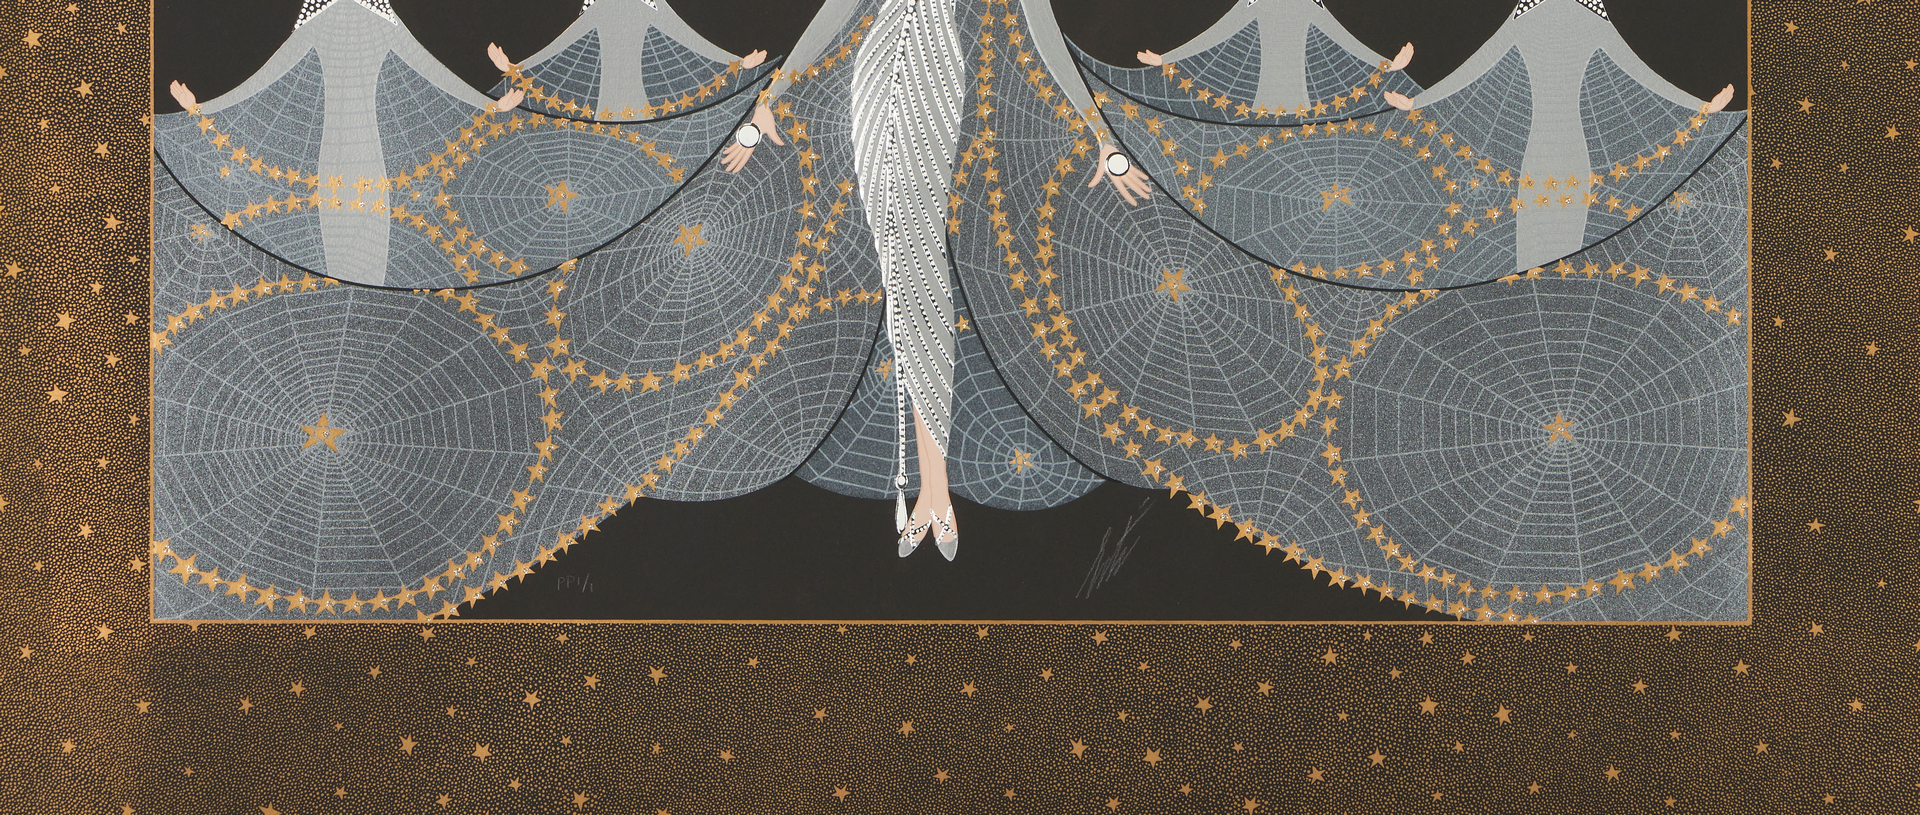 Lot 597: Erte Art Deco Serigraph, Queen of the Night, Publisher's Proof